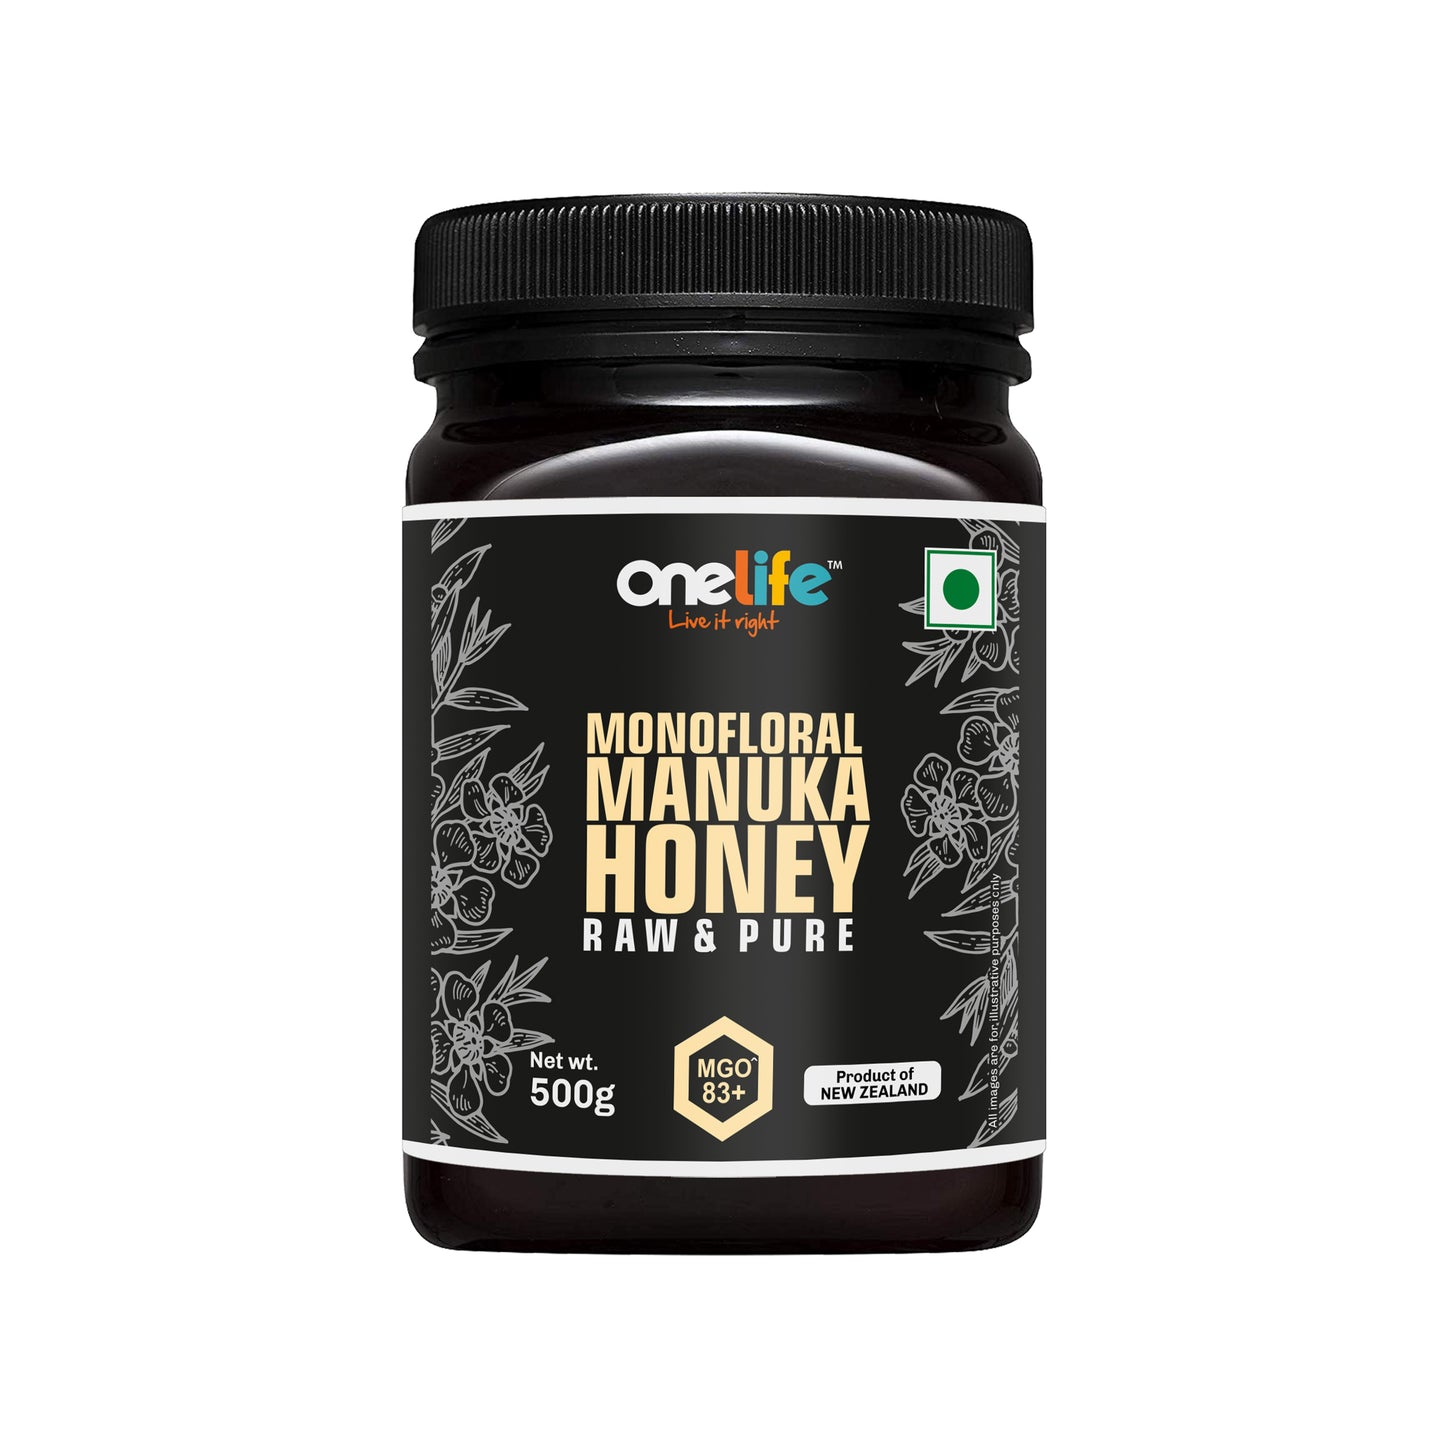 Monofloral Manuka Honey- 500gm (Raw & Pure, Certified 83+MGO, Imported from New Zealand)